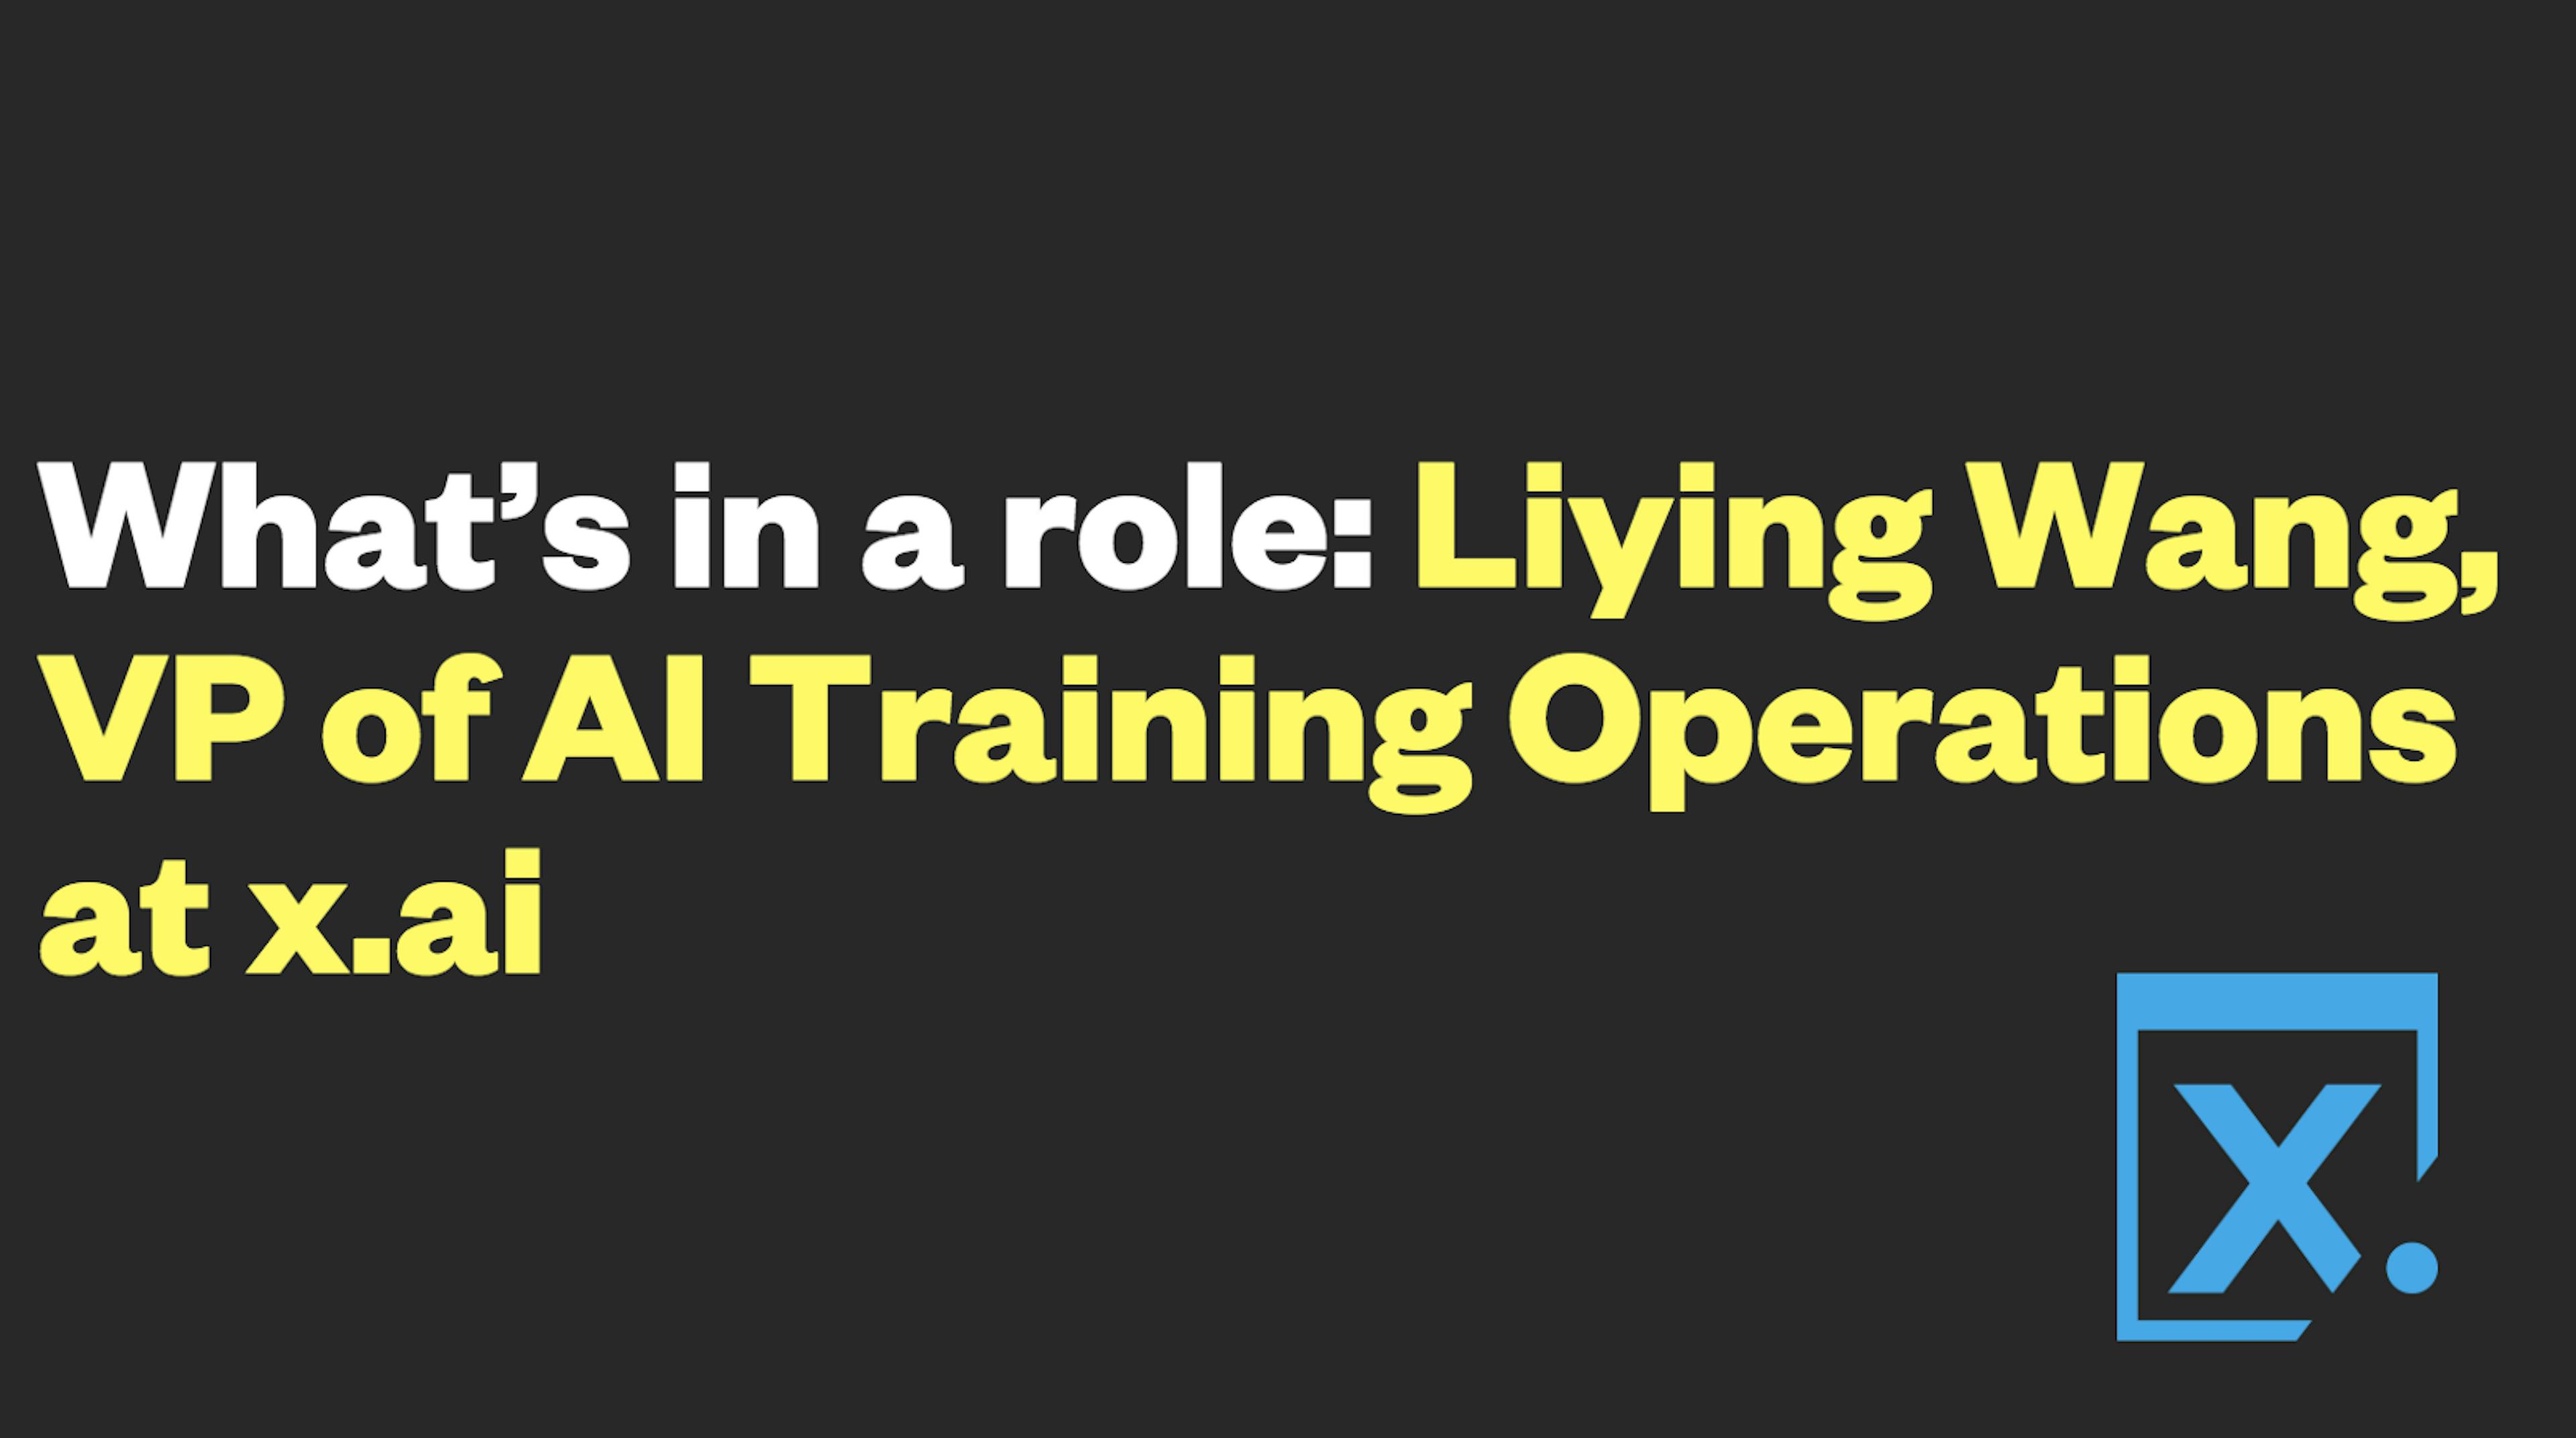 featured image - What’s in a role: Liying Wang, VP of AI Training Operations at x.ai